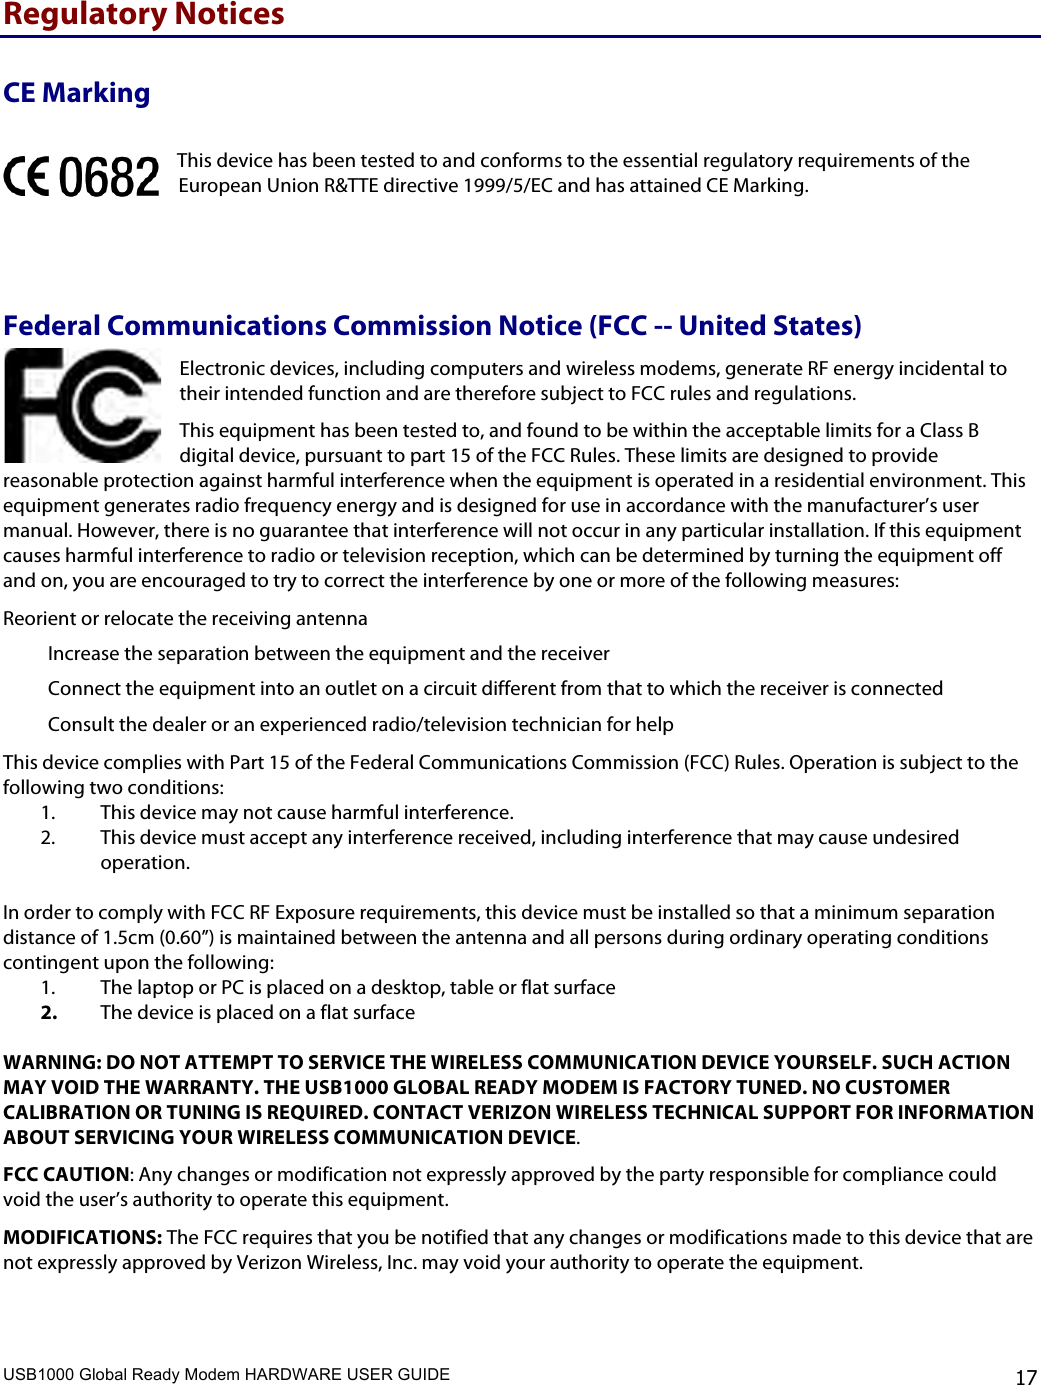 USB1000 Global Ready Modem HARDWARE USER GUIDE    17 Regulatory Notices CE Marking This device has been tested to and conforms to the essential regulatory requirements of the European Union R&amp;TTE directive 1999/5/EC and has attained CE Marking.  Federal Communications Commission Notice (FCC -- United States) Electronic devices, including computers and wireless modems, generate RF energy incidental to their intended function and are therefore subject to FCC rules and regulations.  This equipment has been tested to, and found to be within the acceptable limits for a Class B digital device, pursuant to part 15 of the FCC Rules. These limits are designed to provide reasonable protection against harmful interference when the equipment is operated in a residential environment. This equipment generates radio frequency energy and is designed for use in accordance with the manufacturer’s user manual. However, there is no guarantee that interference will not occur in any particular installation. If this equipment causes harmful interference to radio or television reception, which can be determined by turning the equipment off and on, you are encouraged to try to correct the interference by one or more of the following measures:  Reorient or relocate the receiving antenna  Increase the separation between the equipment and the receiver  Connect the equipment into an outlet on a circuit different from that to which the receiver is connected Consult the dealer or an experienced radio/television technician for help This device complies with Part 15 of the Federal Communications Commission (FCC) Rules. Operation is subject to the following two conditions: 1. This device may not cause harmful interference.  2. This device must accept any interference received, including interference that may cause undesired operation.   In order to comply with FCC RF Exposure requirements, this device must be installed so that a minimum separation distance of 1.5cm (0.60”) is maintained between the antenna and all persons during ordinary operating conditions contingent upon the following: 1. The laptop or PC is placed on a desktop, table or flat surface 2. The device is placed on a flat surface  WARNING: DO NOT ATTEMPT TO SERVICE THE WIRELESS COMMUNICATION DEVICE YOURSELF. SUCH ACTION MAY VOID THE WARRANTY. THE USB1000 GLOBAL READY MODEM IS FACTORY TUNED. NO CUSTOMER CALIBRATION OR TUNING IS REQUIRED. CONTACT VERIZON WIRELESS TECHNICAL SUPPORT FOR INFORMATION ABOUT SERVICING YOUR WIRELESS COMMUNICATION DEVICE. FCC CAUTION: Any changes or modification not expressly approved by the party responsible for compliance could void the user’s authority to operate this equipment.  MODIFICATIONS: The FCC requires that you be notified that any changes or modifications made to this device that are not expressly approved by Verizon Wireless, Inc. may void your authority to operate the equipment.  